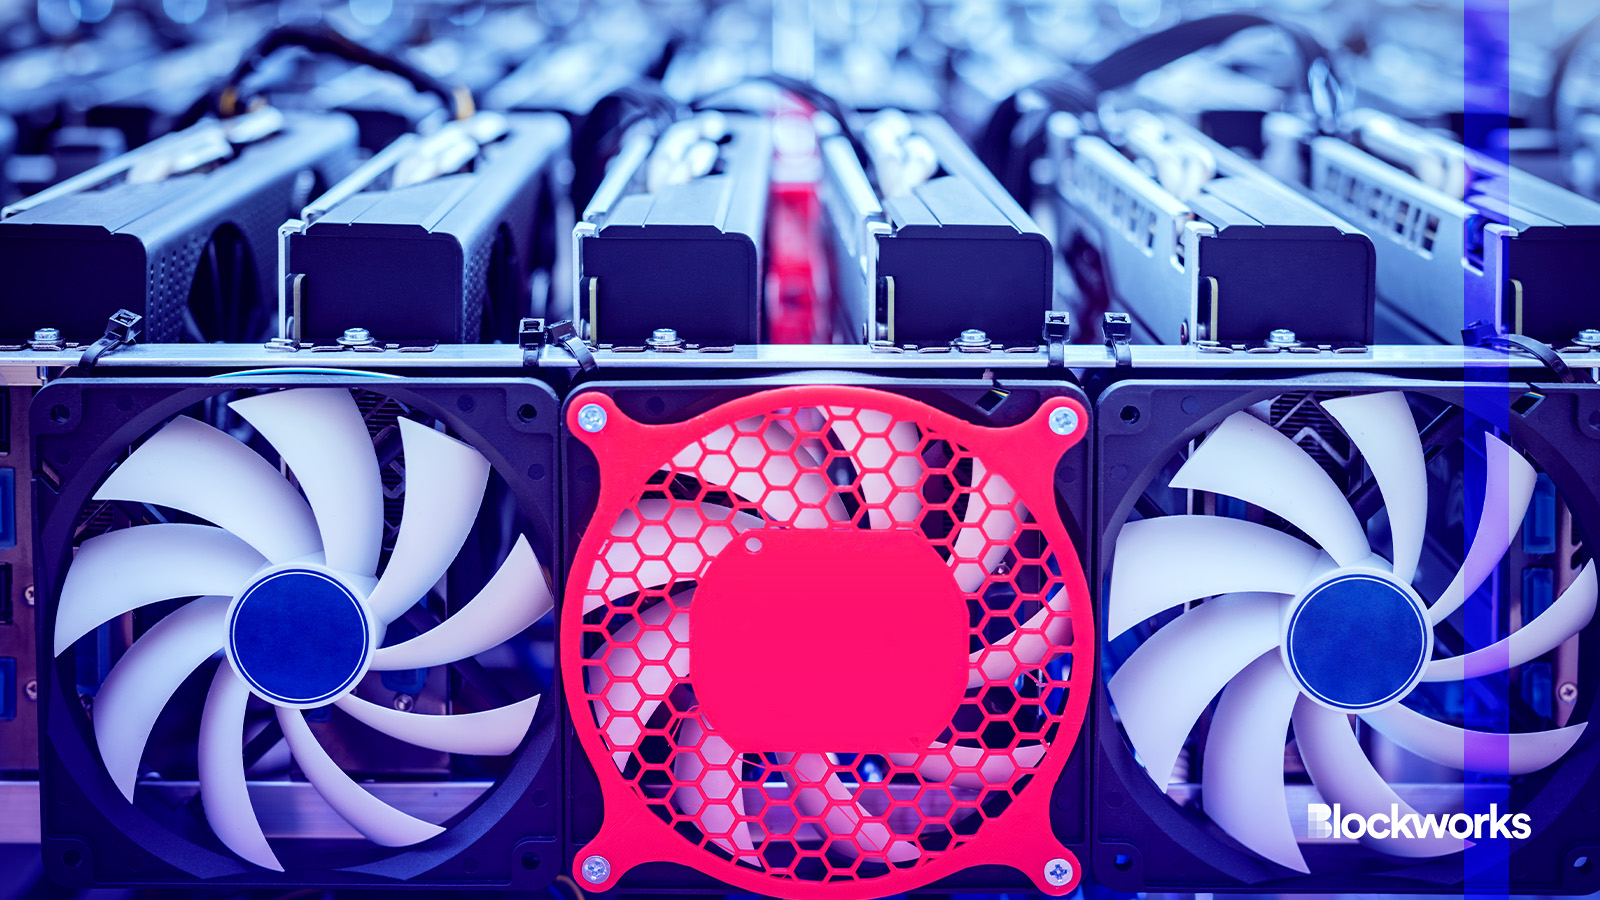 Another bitcoin miner has gone public in the US - Blockworks